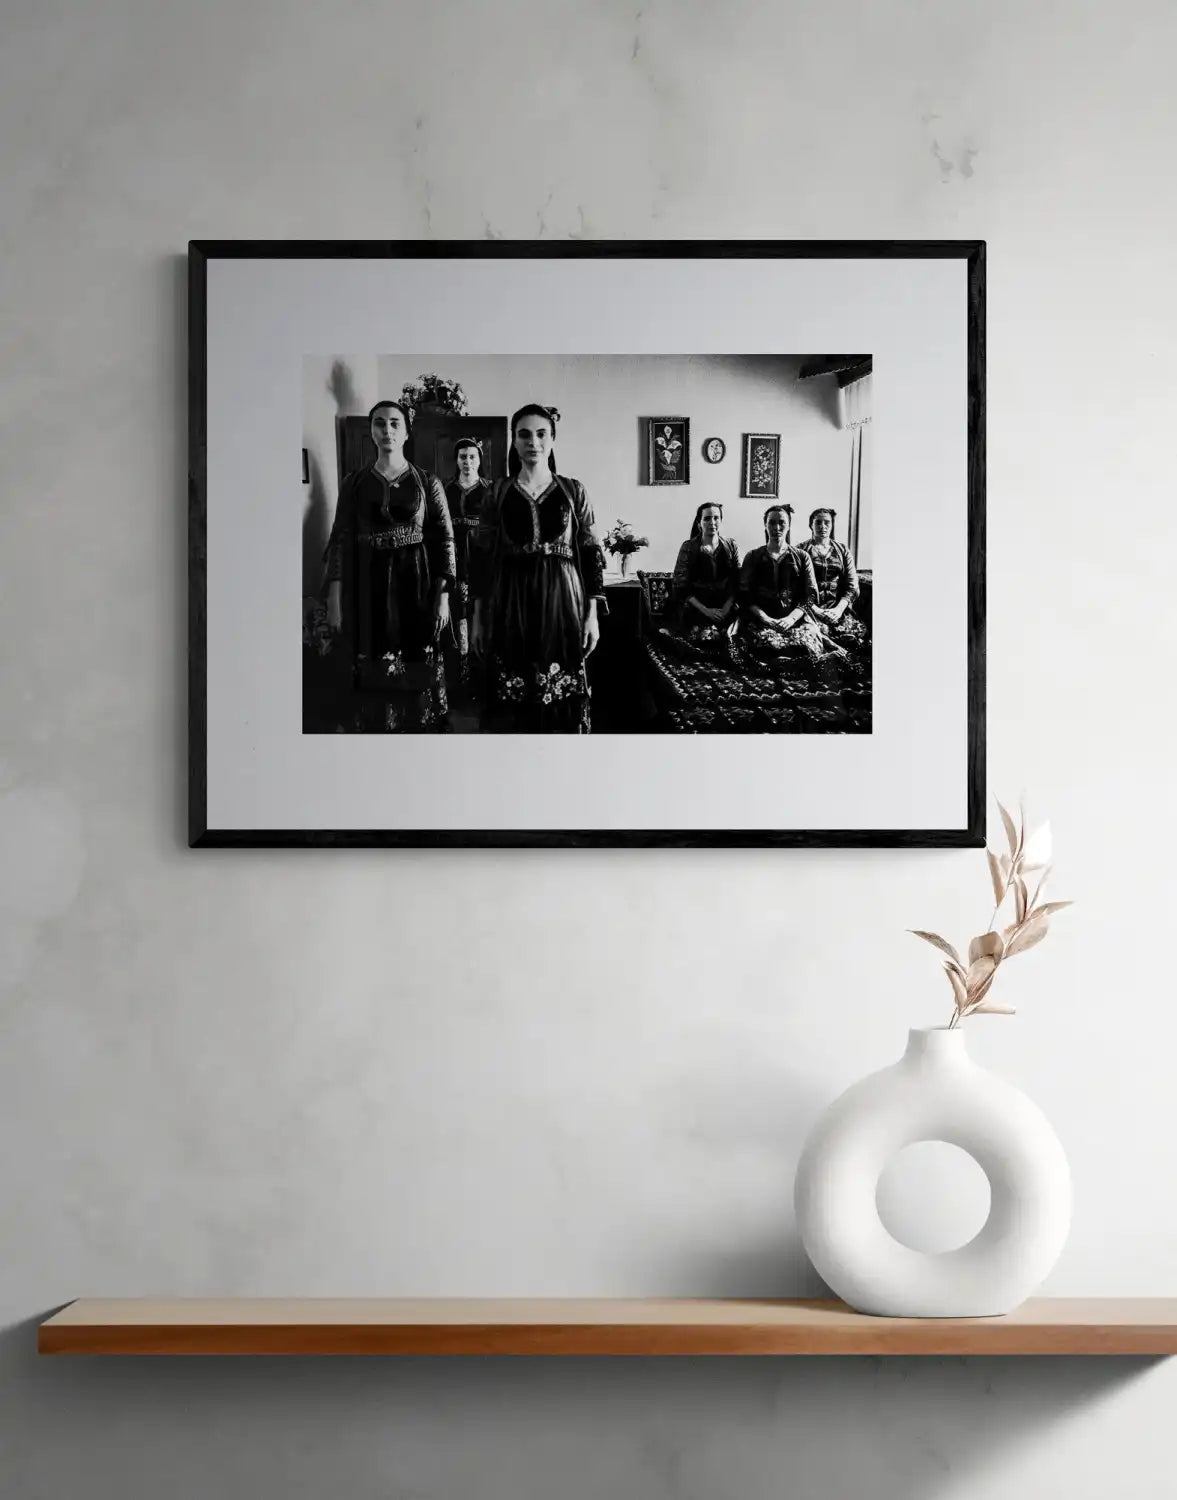 Metsovo, Epirus, Greece | Costumes in Local House | Black-and-White Wall Art Photography - single print framed